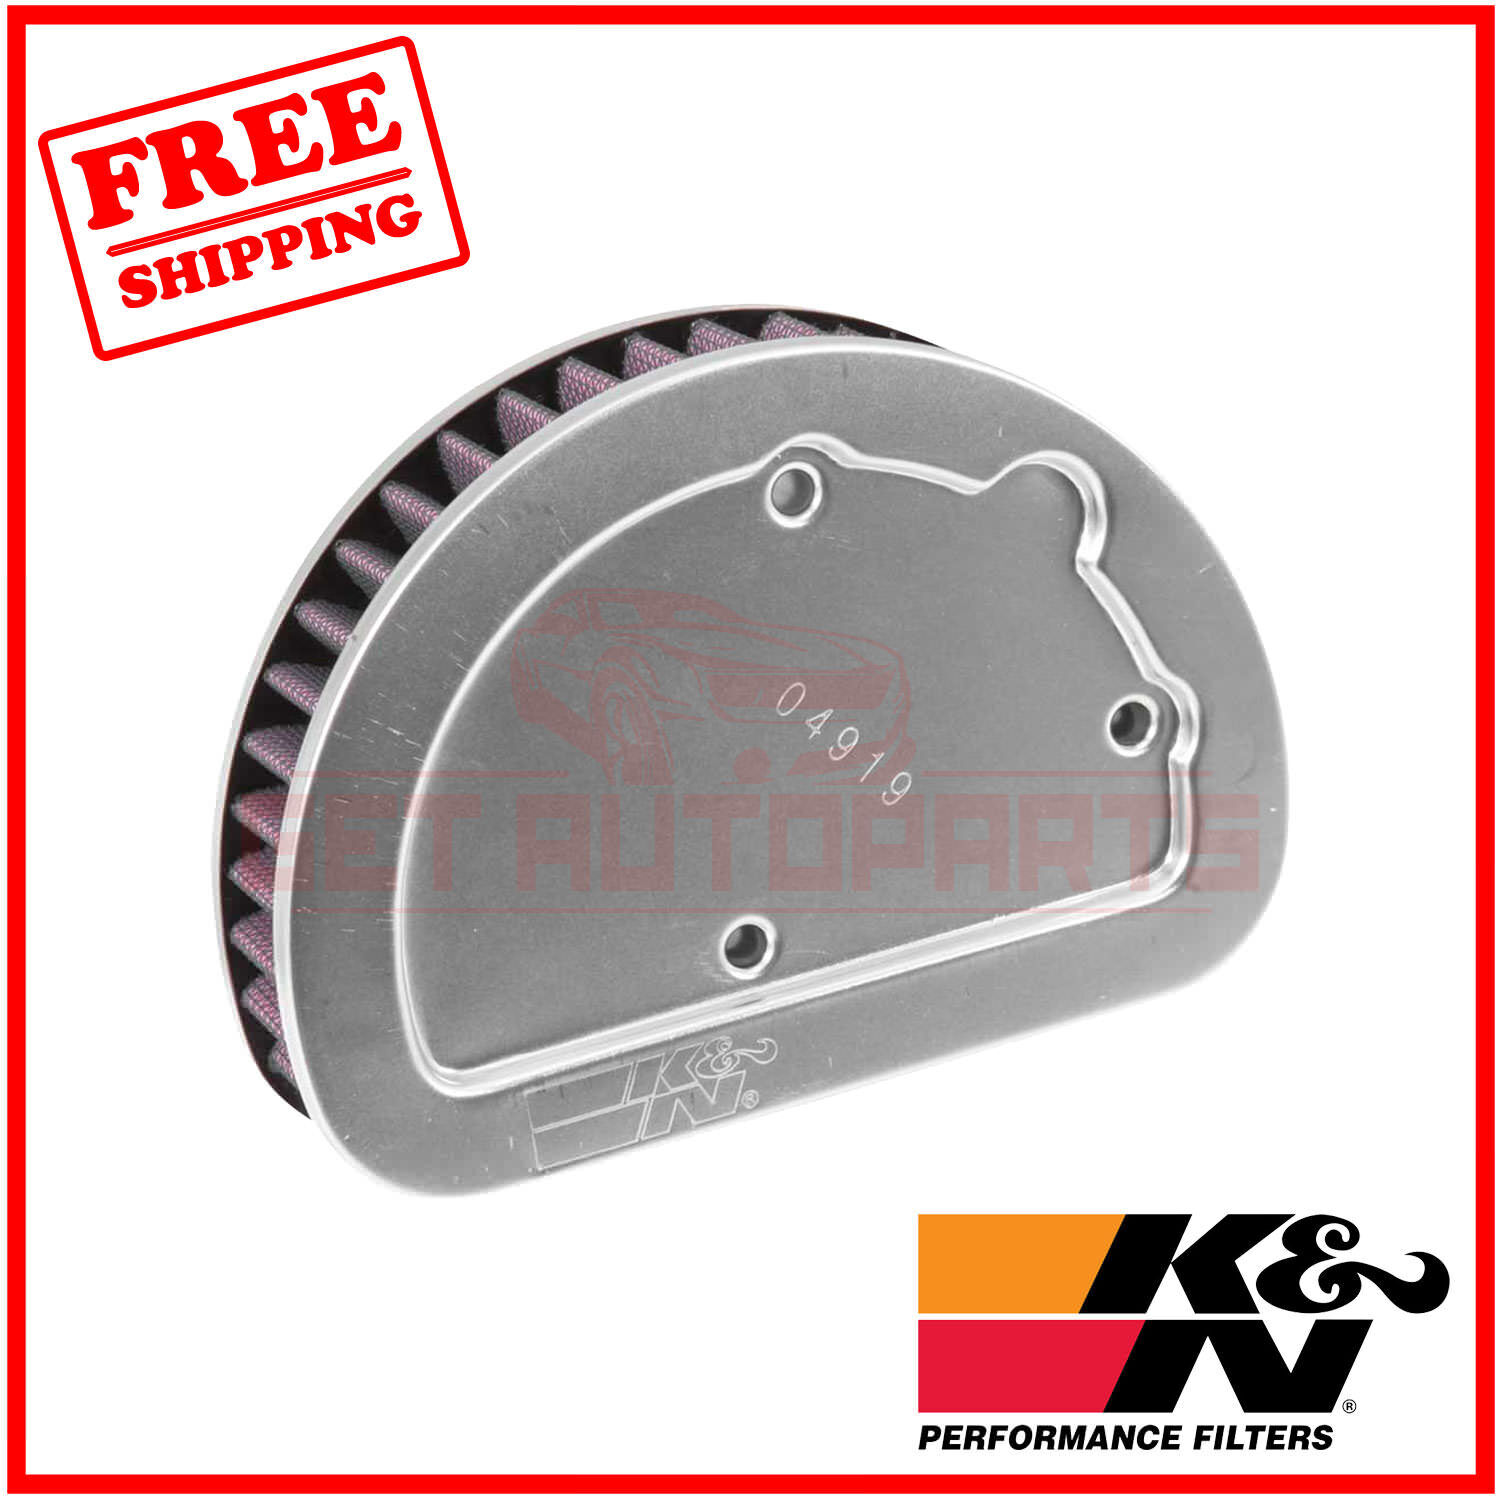 K&N Replacement Air Filter for Harley D. FLHTCUL Electra Glide Ultra Low 2015-16